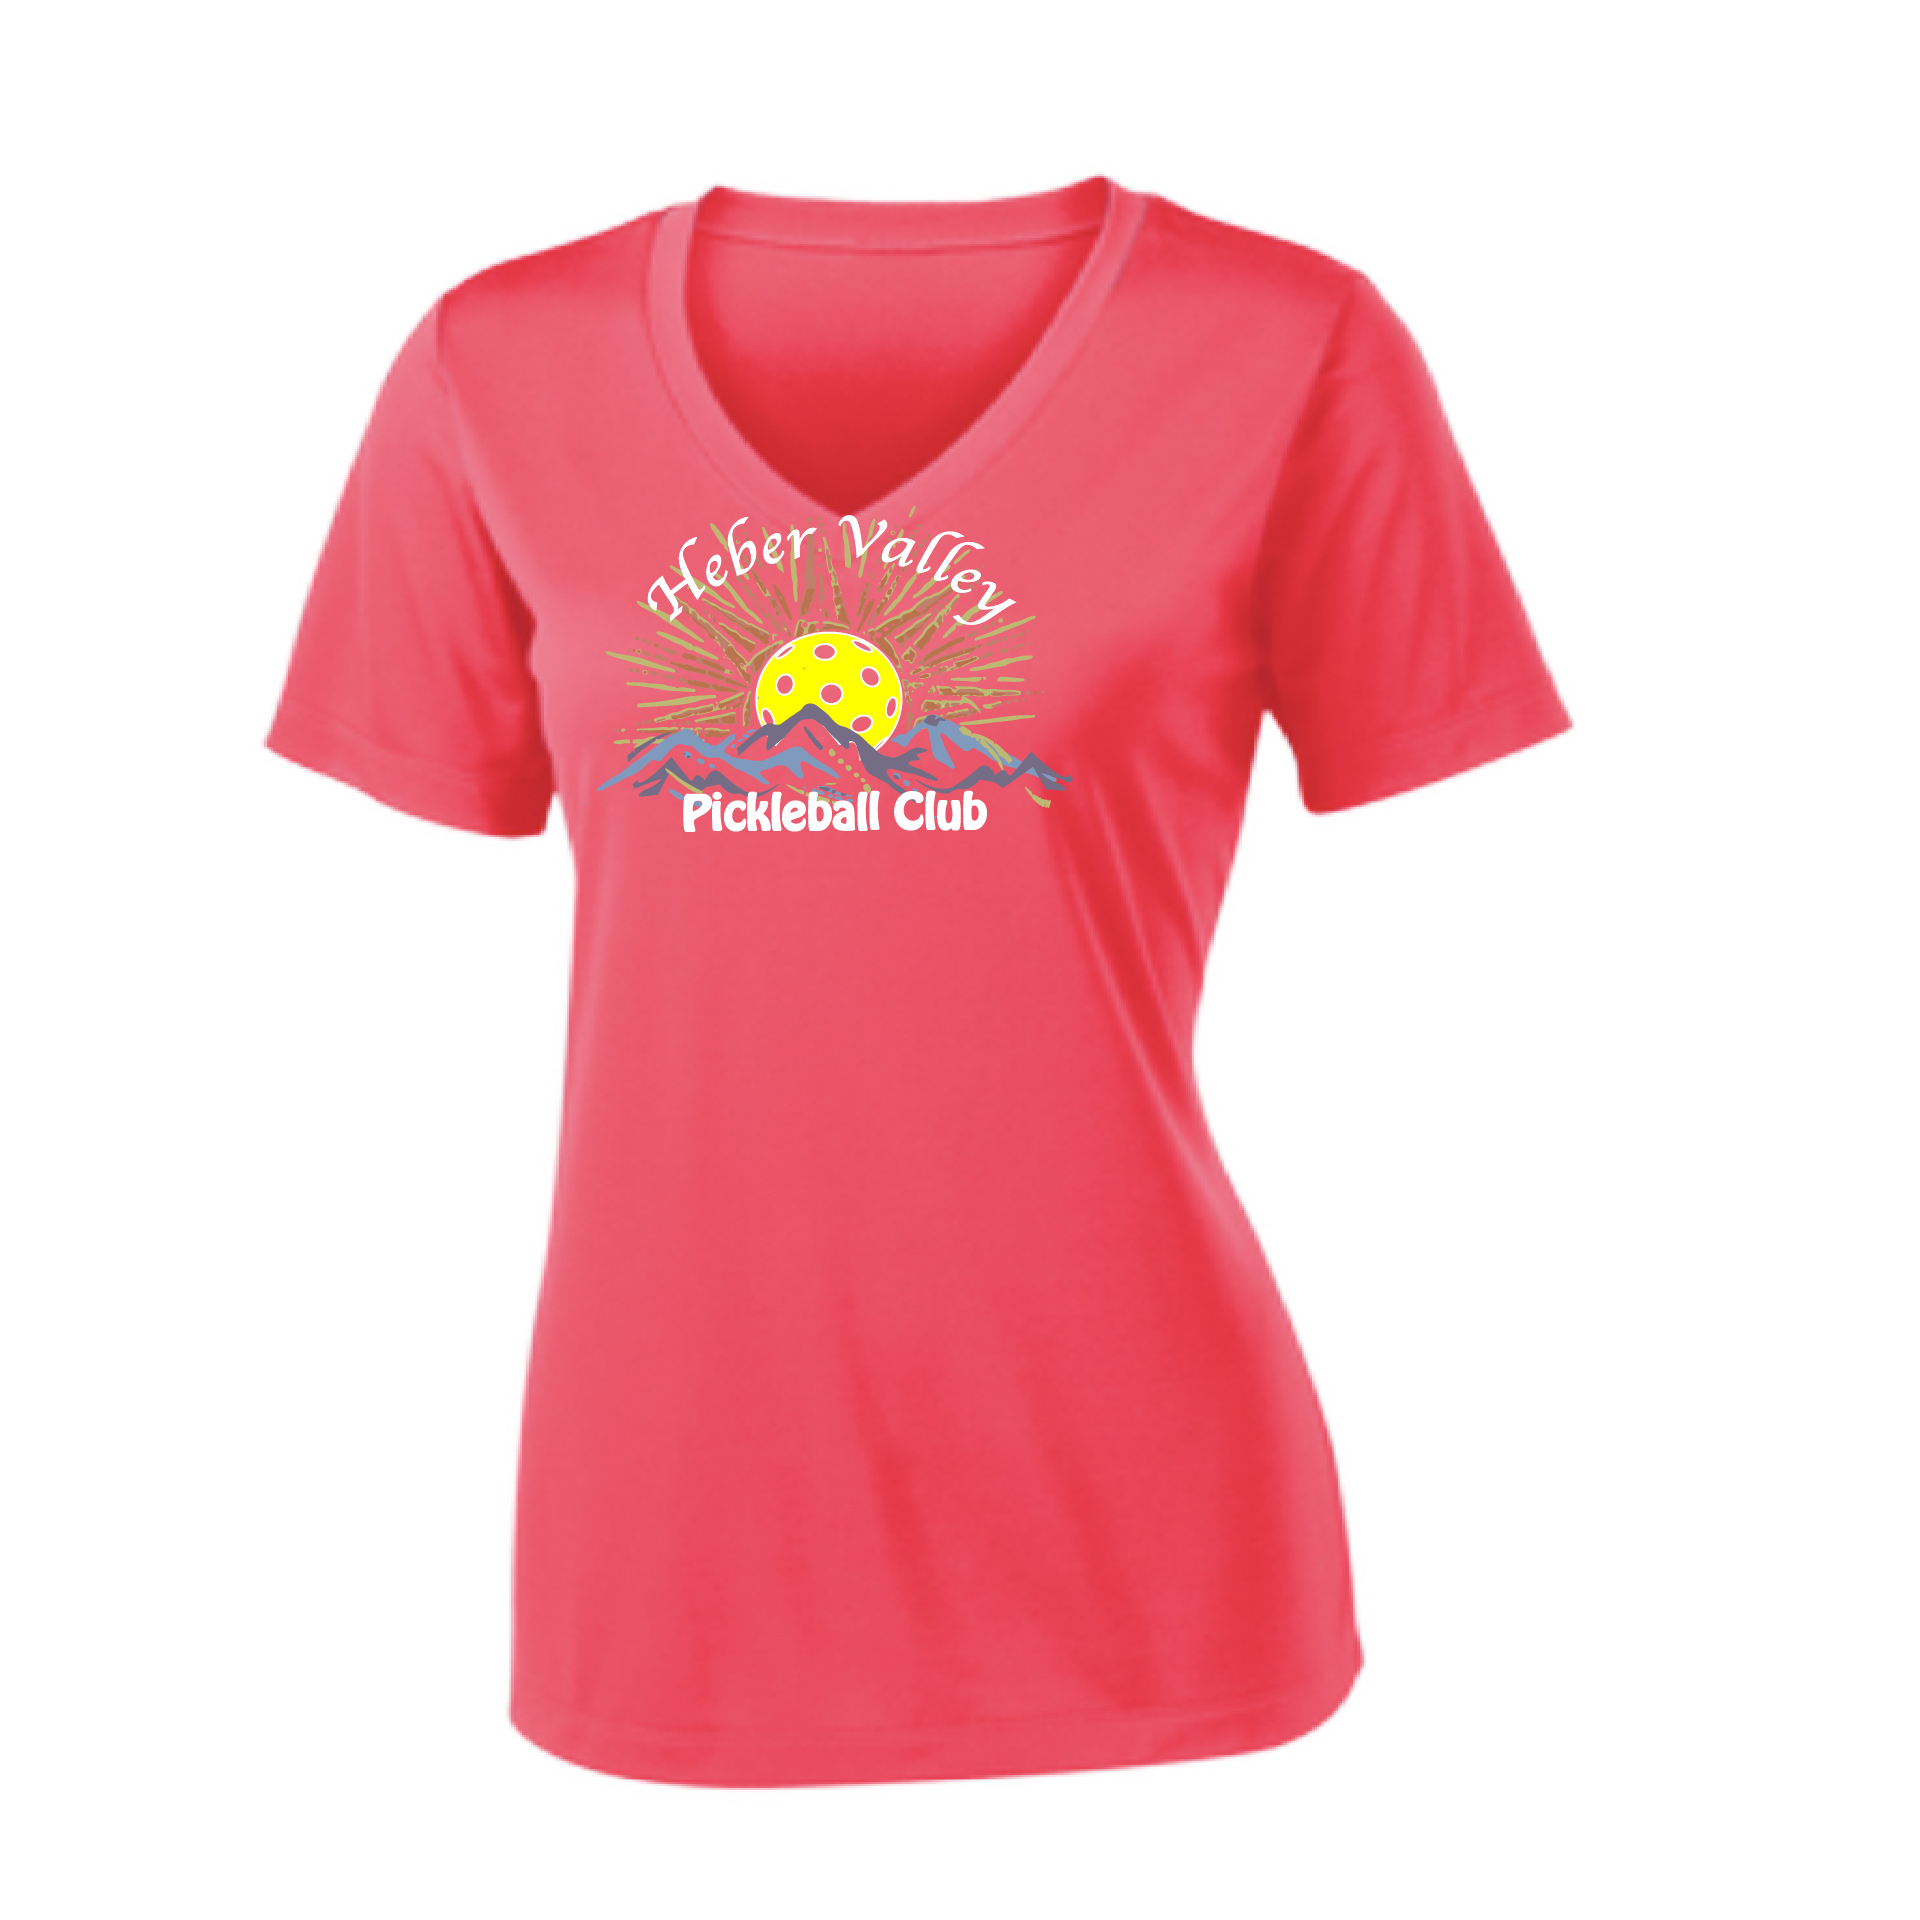 Pickleball Shirt Design: Heber Valley Pickleball Club  Women's Style: Short Sleeve V-Neck  Turn up the volume in this Women's shirt with its perfect mix of softness and attitude. Material is ultra-comfortable with moisture wicking properties and tri-blend softness. PosiCharge technology locks in color. Highly breathable and lightweight.